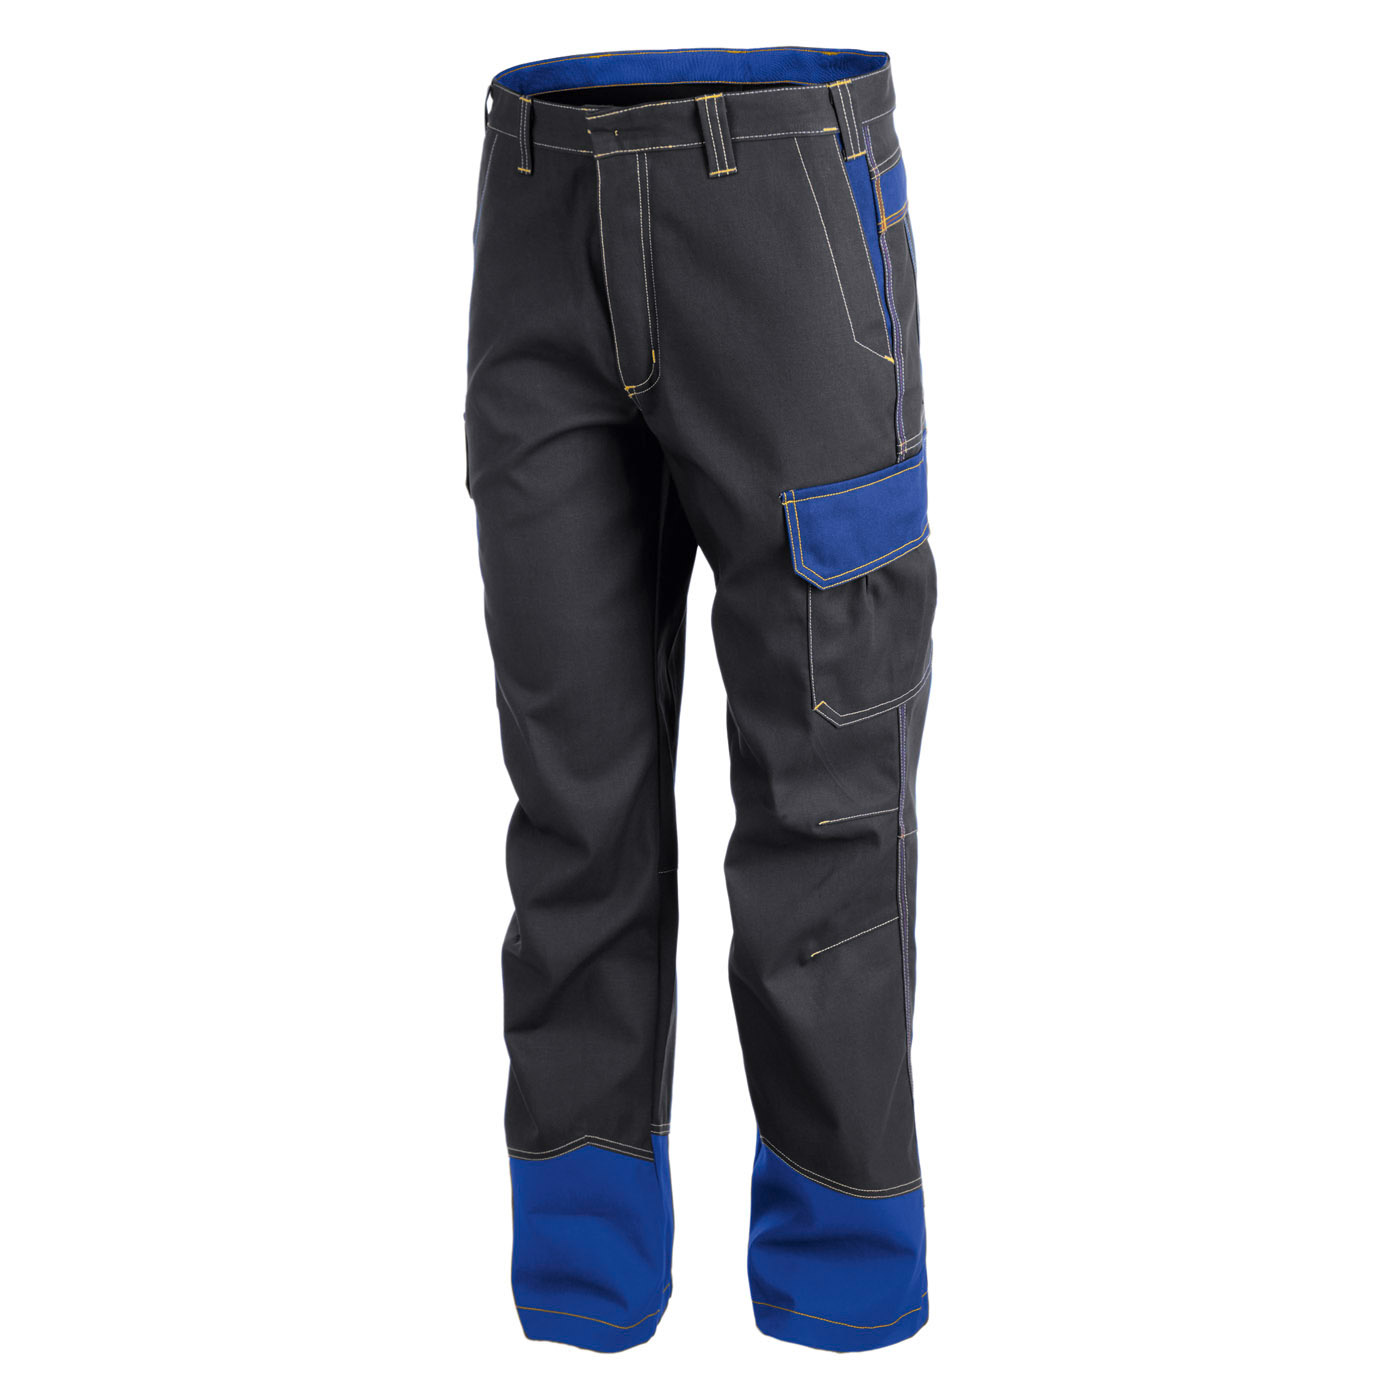 SAFETY 6 Trousers PPE 3